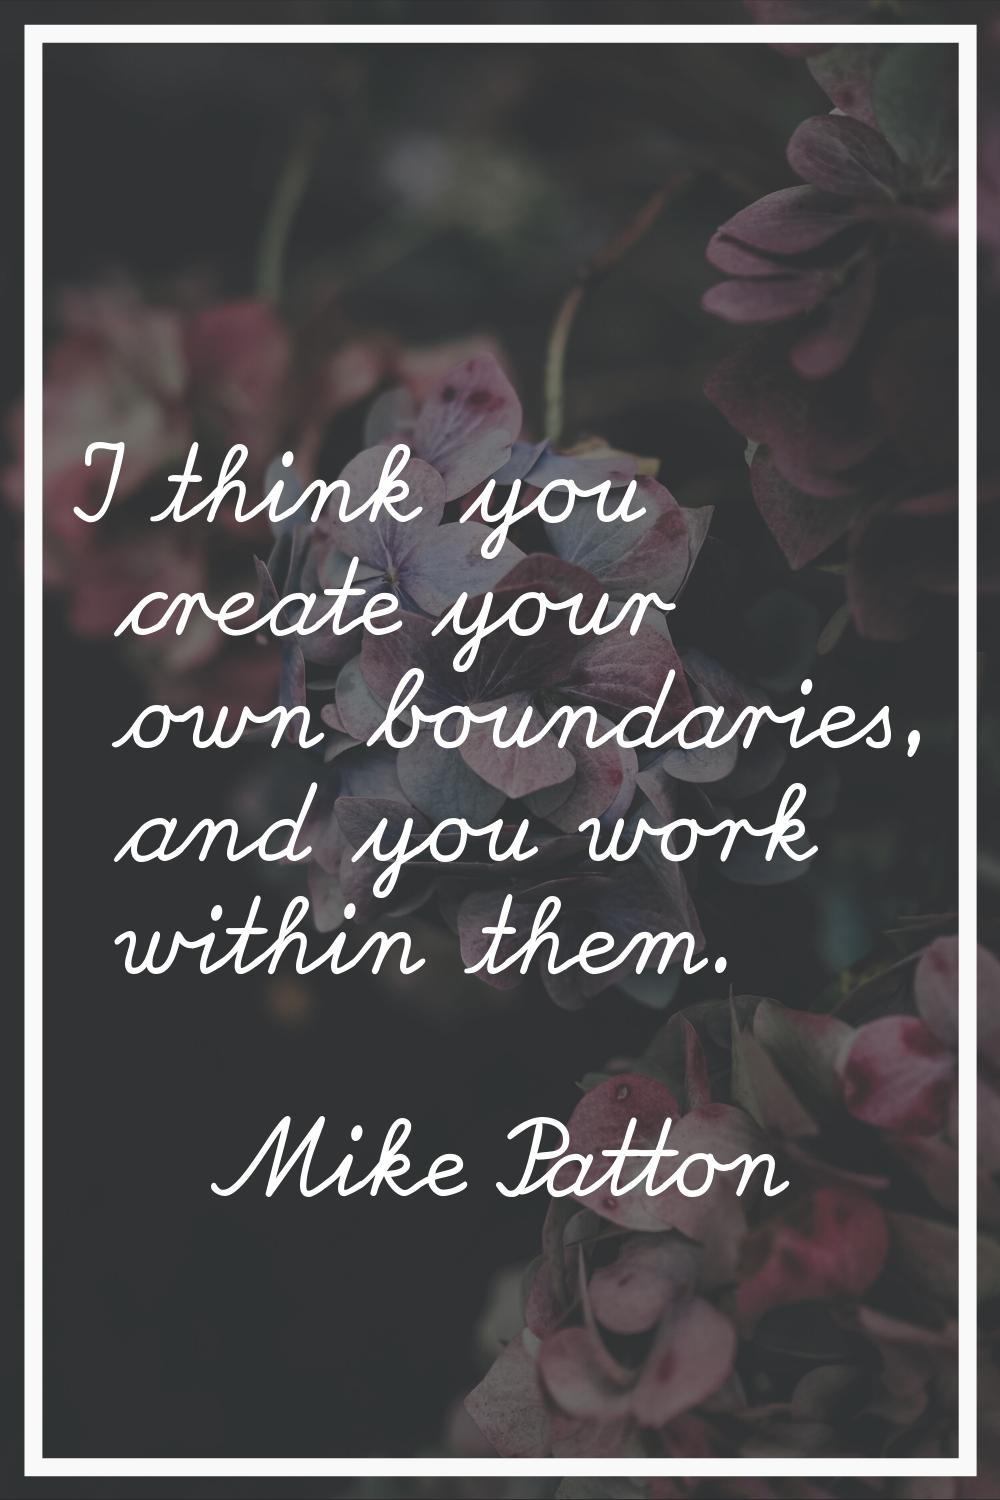 I think you create your own boundaries, and you work within them.